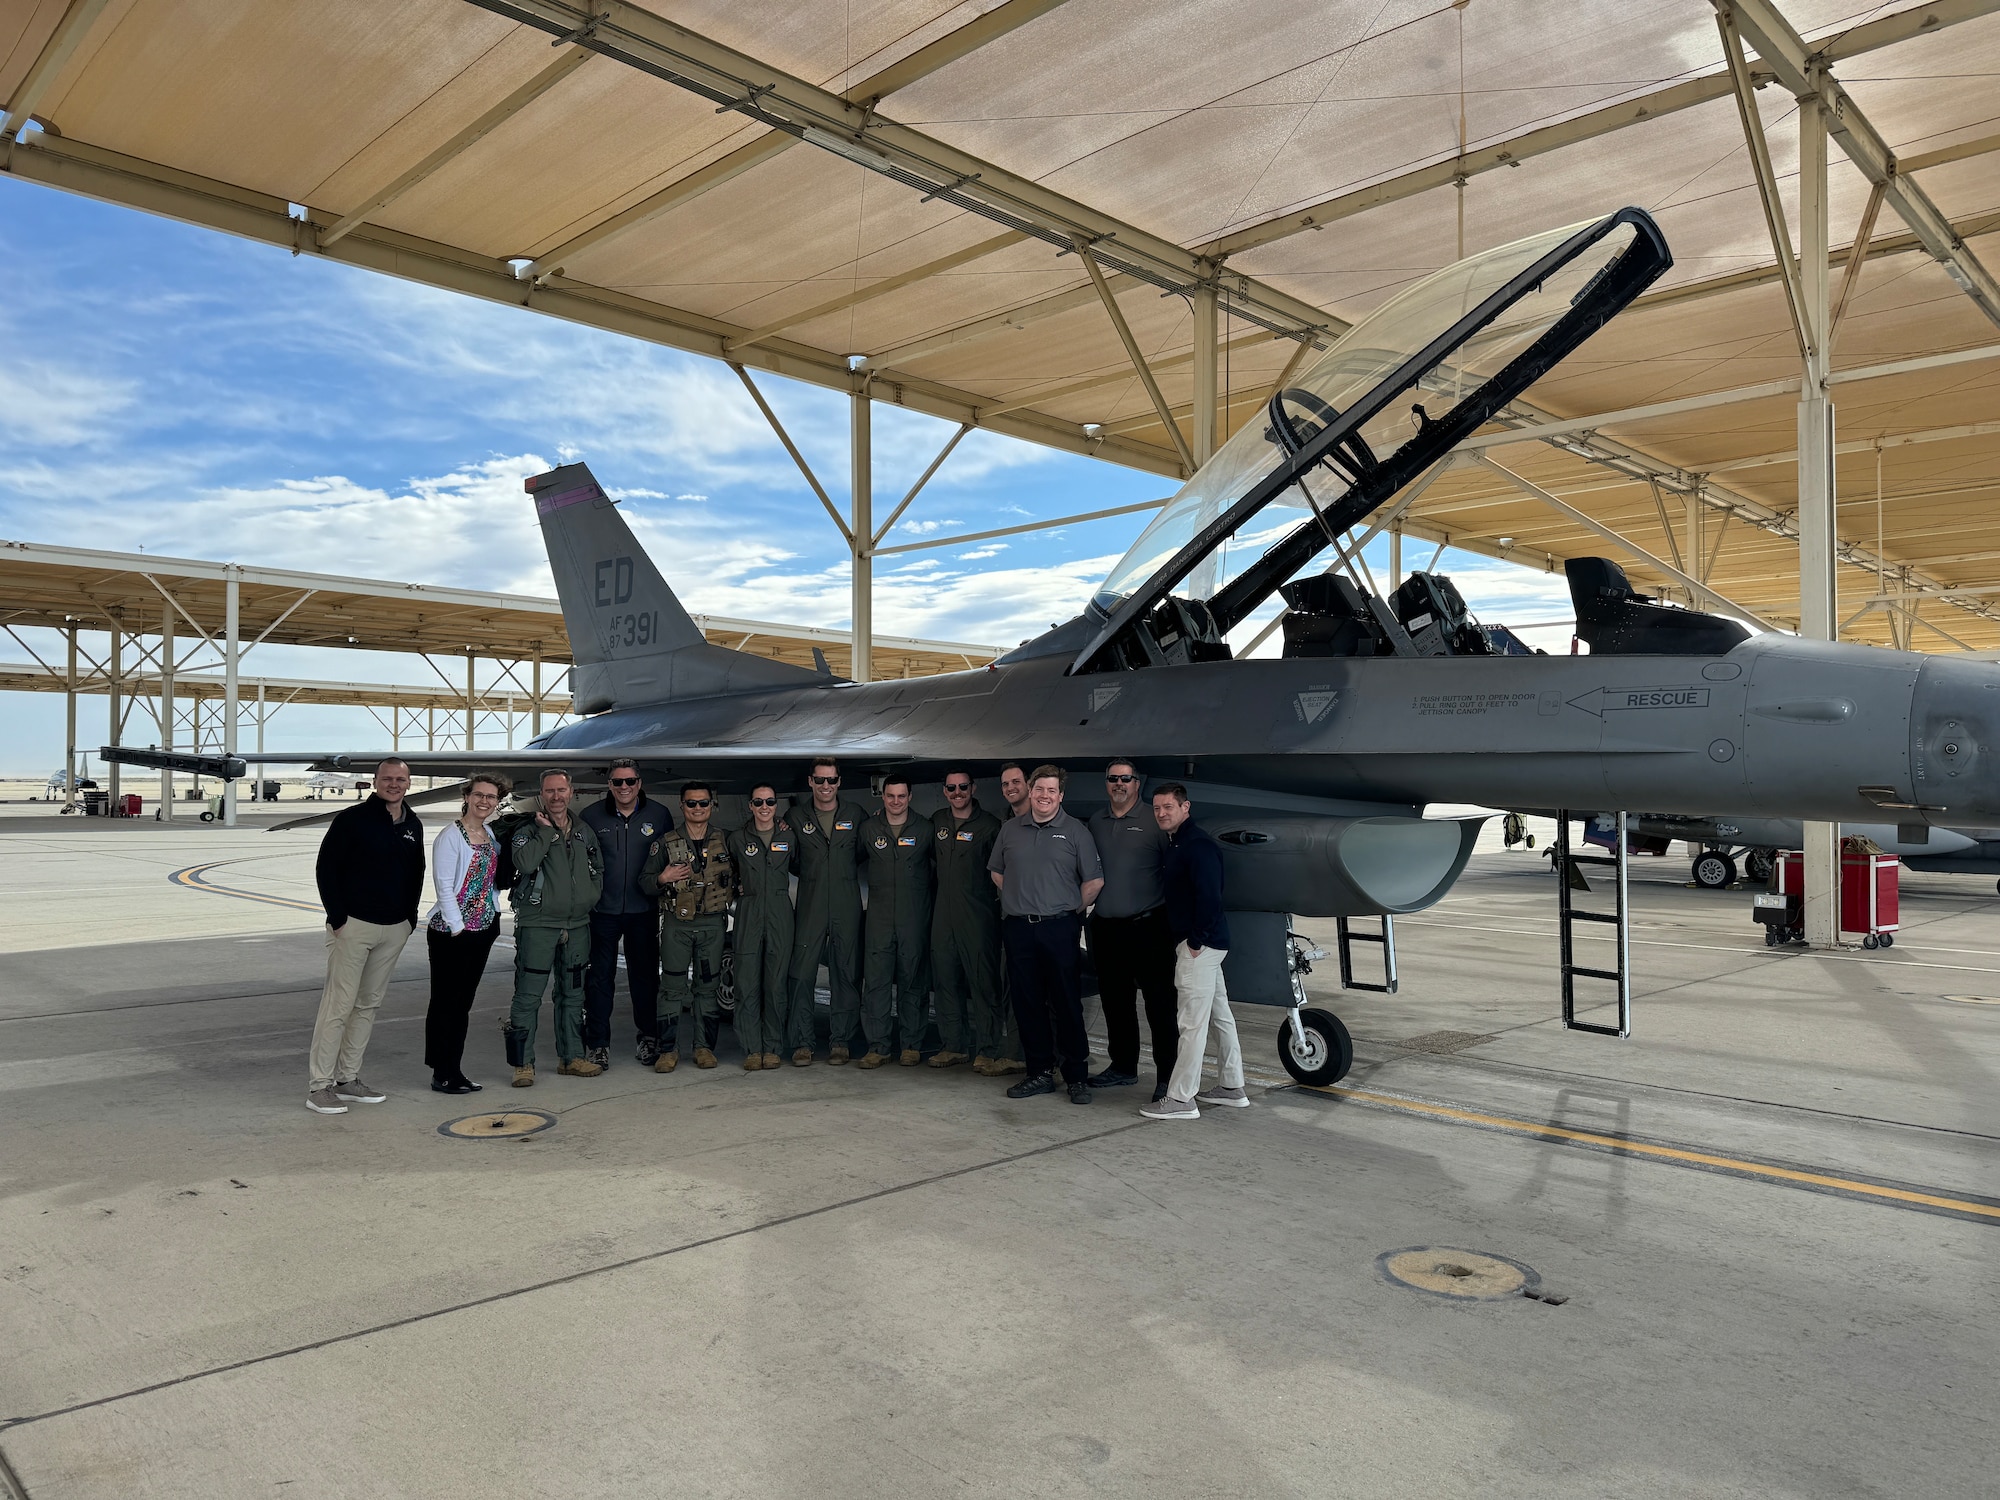 Air Force Research Laboratory, or AFRL, scientists and engineers along with U.S. Air Force Test Pilot School students prepare for the Integrated Cockpit Sensing, or ICS, system to be flight tested on an F-16 at Edwards Air Force Base, California, March 12, 2024. An AFRL team developed the ICS system to provide an airworthy platform for comprehensive physiological, life-support and environmental monitoring to improve pilot safety and performance. The system has helmet-based, base layer and life-support sensors, ensuring holistic information on the pilot and operating environment during flight. (U.S. Air Force photo / Wei Lee)